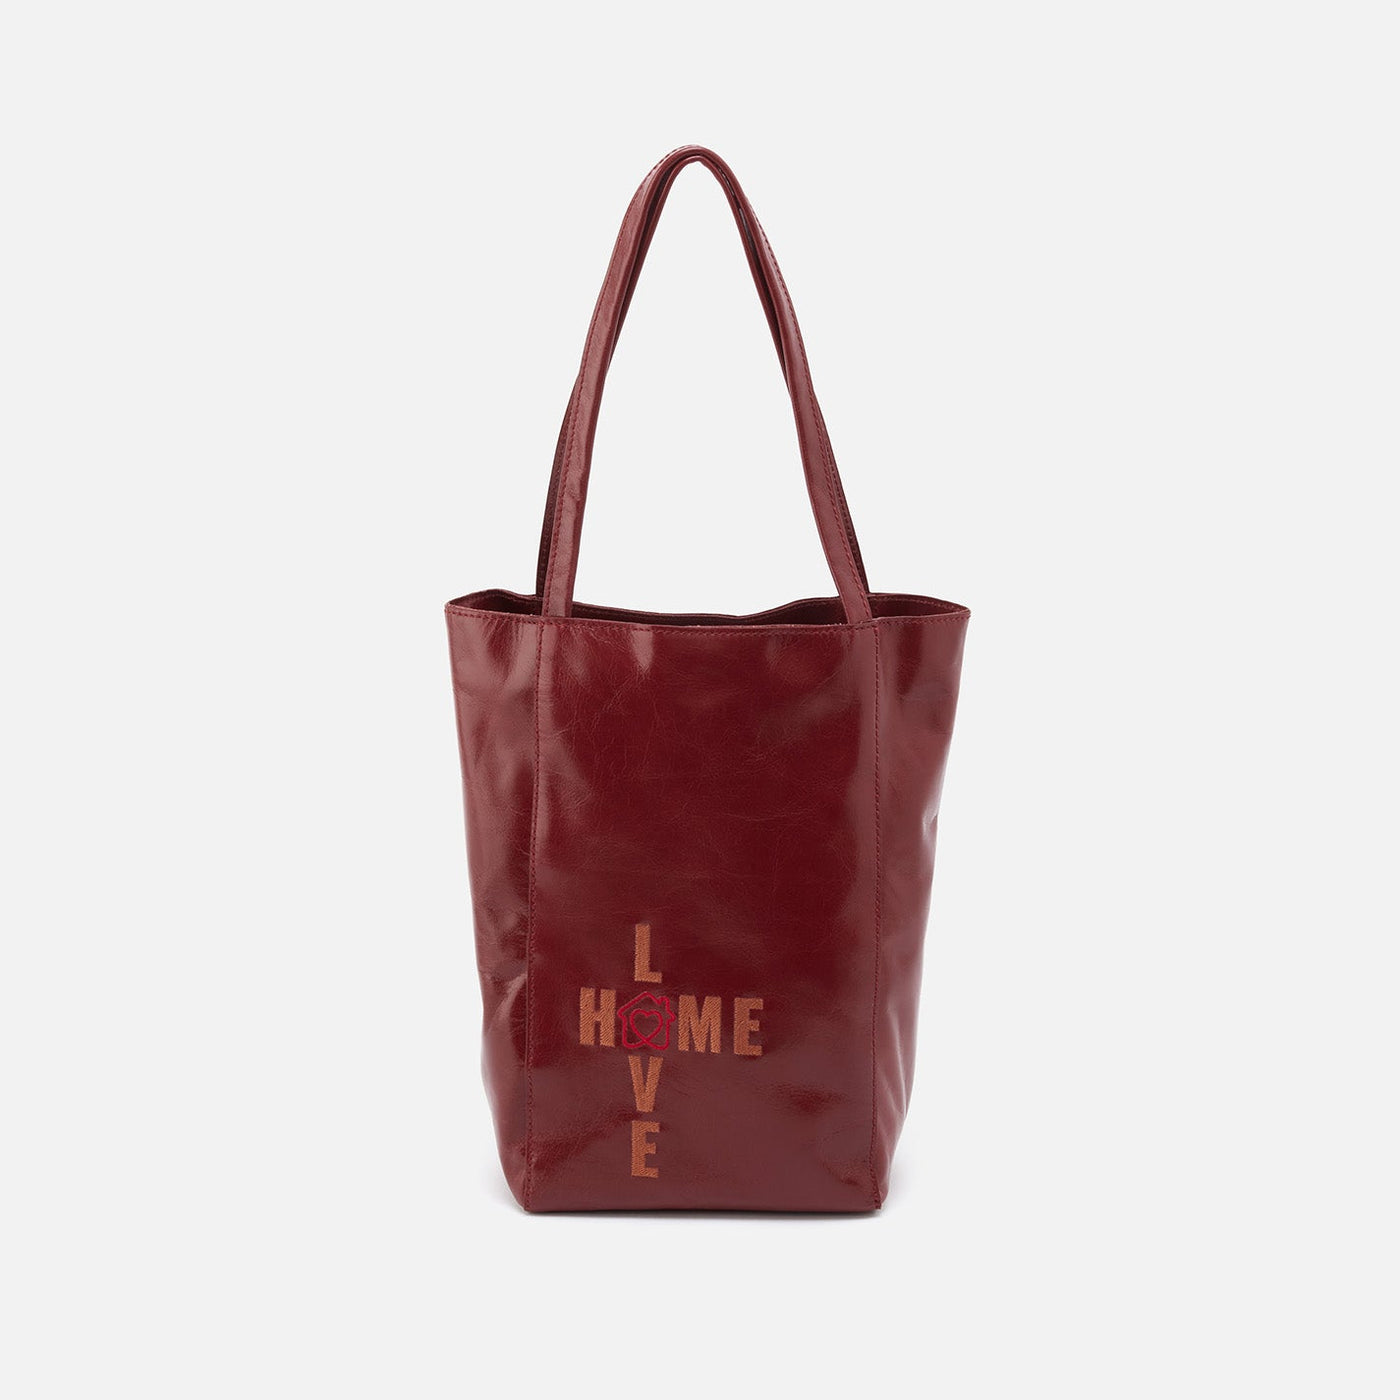 The Giving Tote Mini Tote in Polished Leather - Mahogany